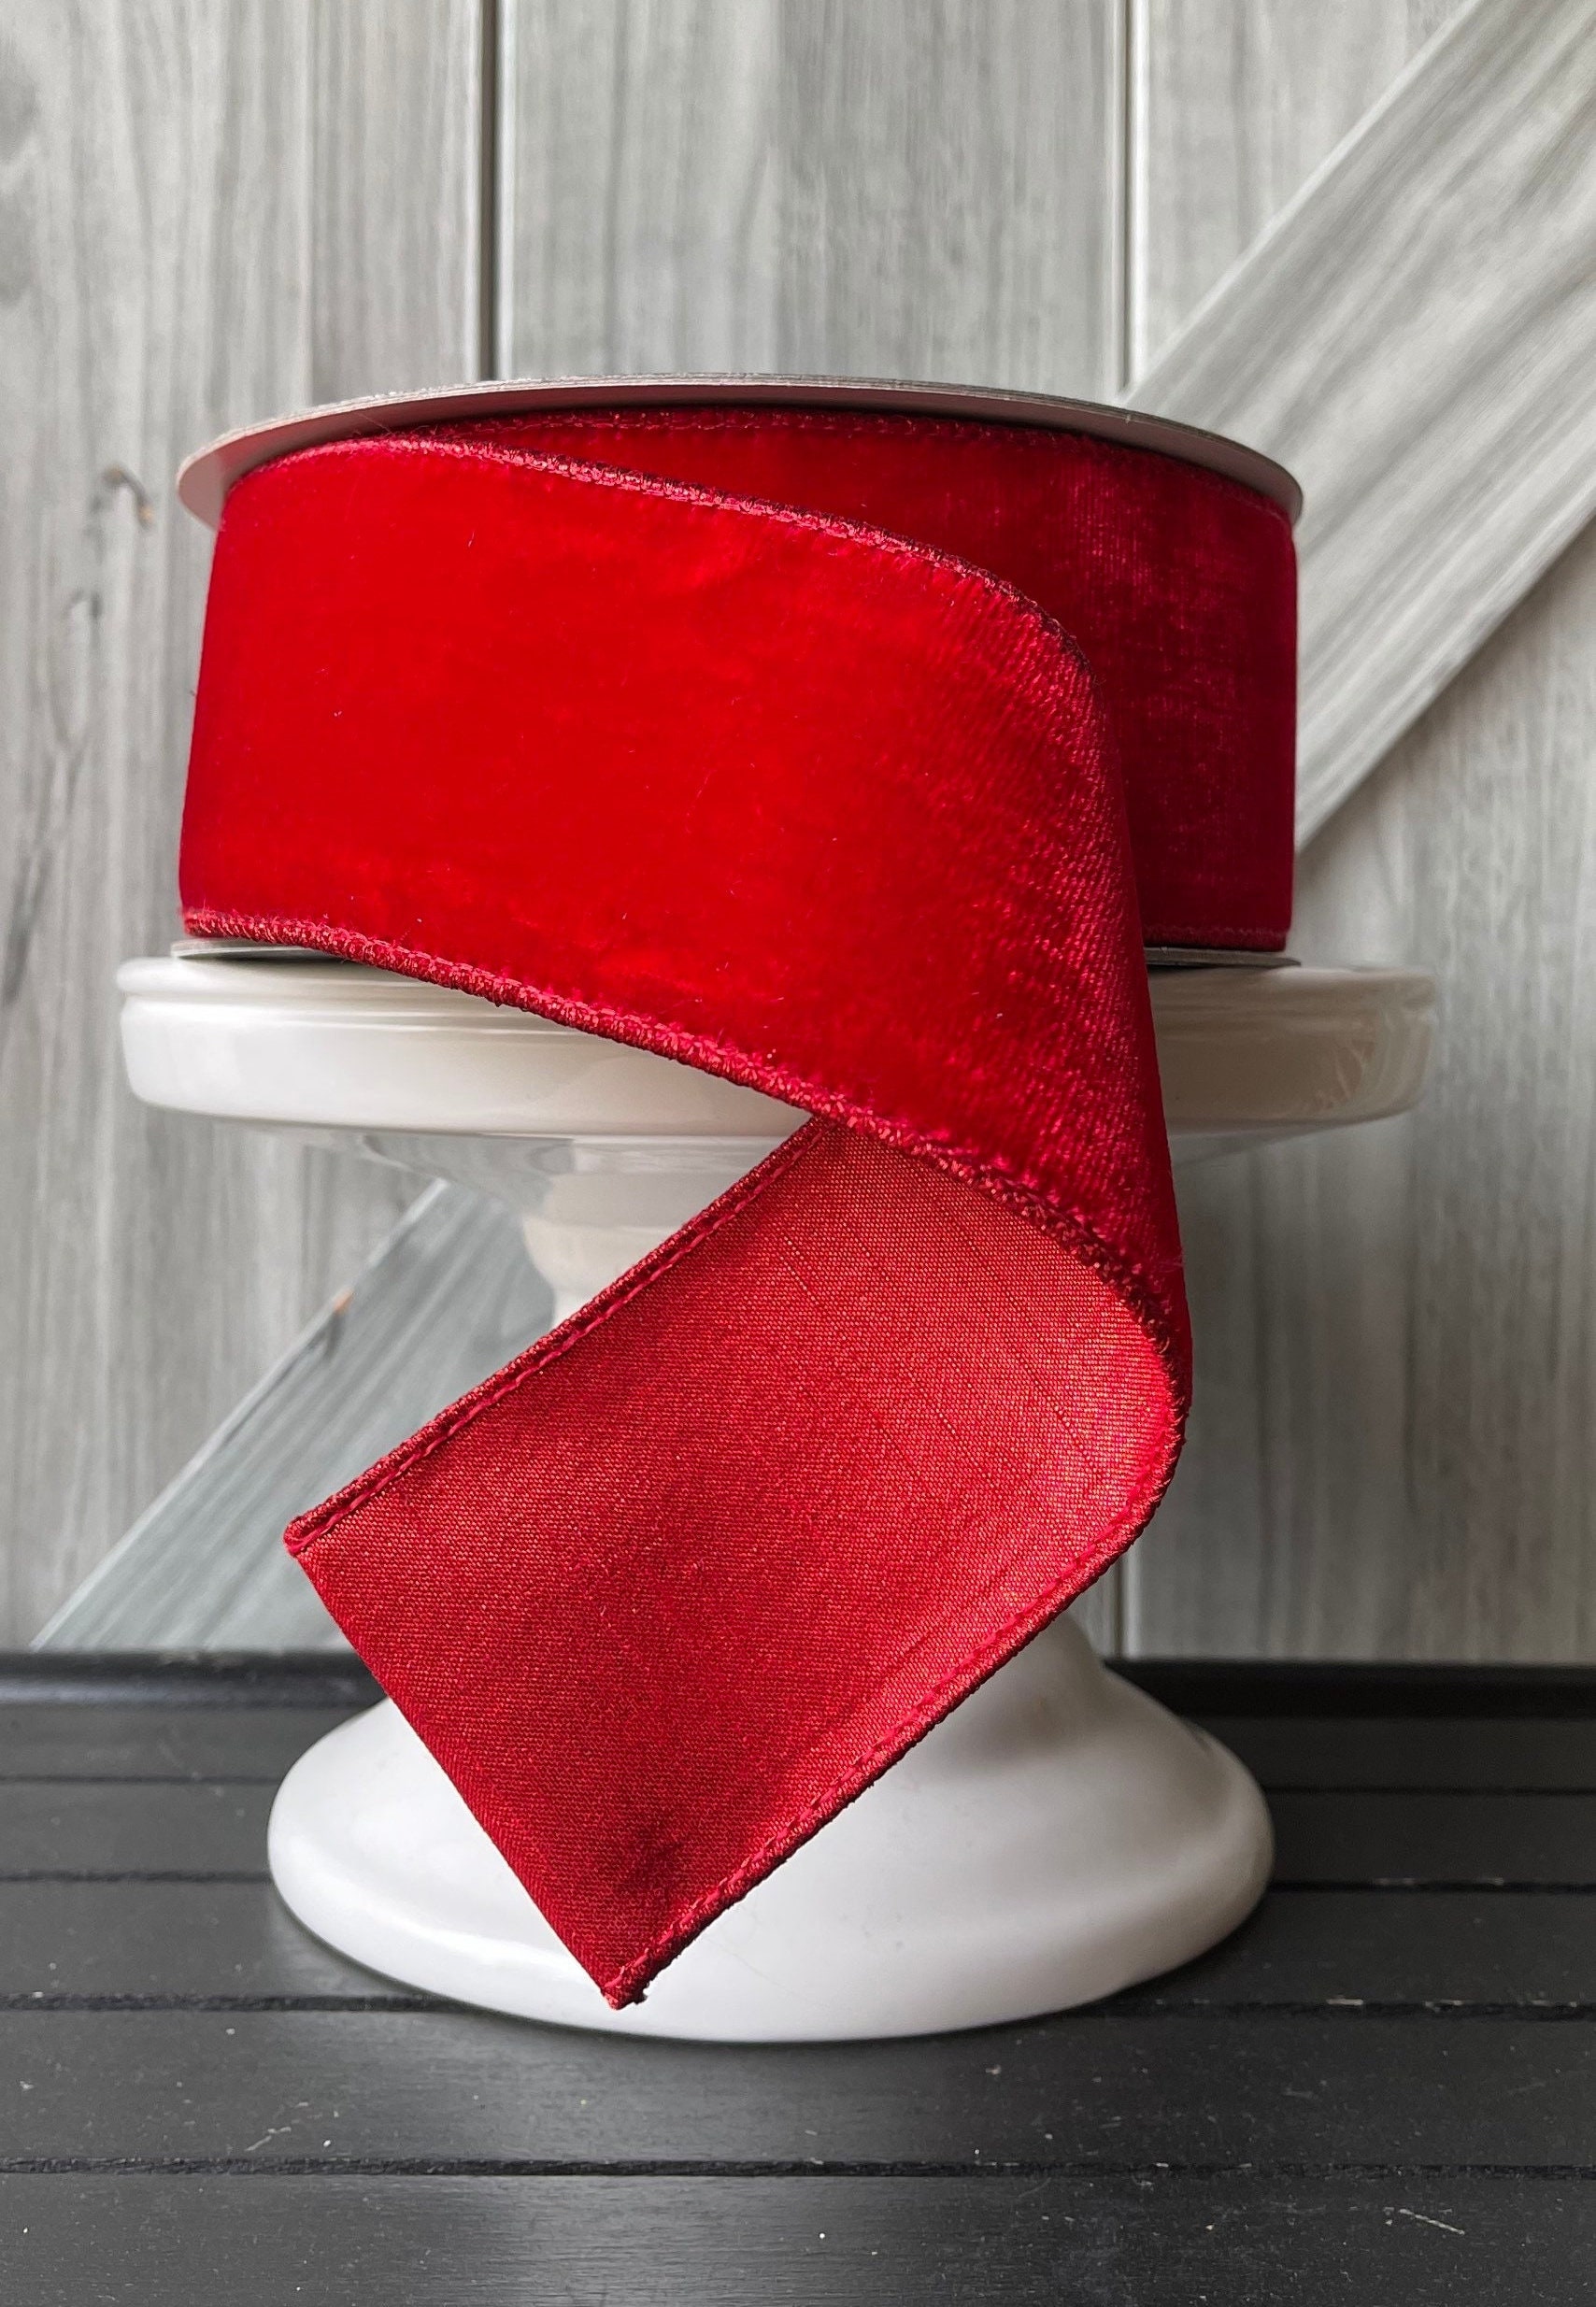 The Ribbon Roll 4 Velvet Wired Ribbon in Hot Red | 4 x 10yd | Michaels